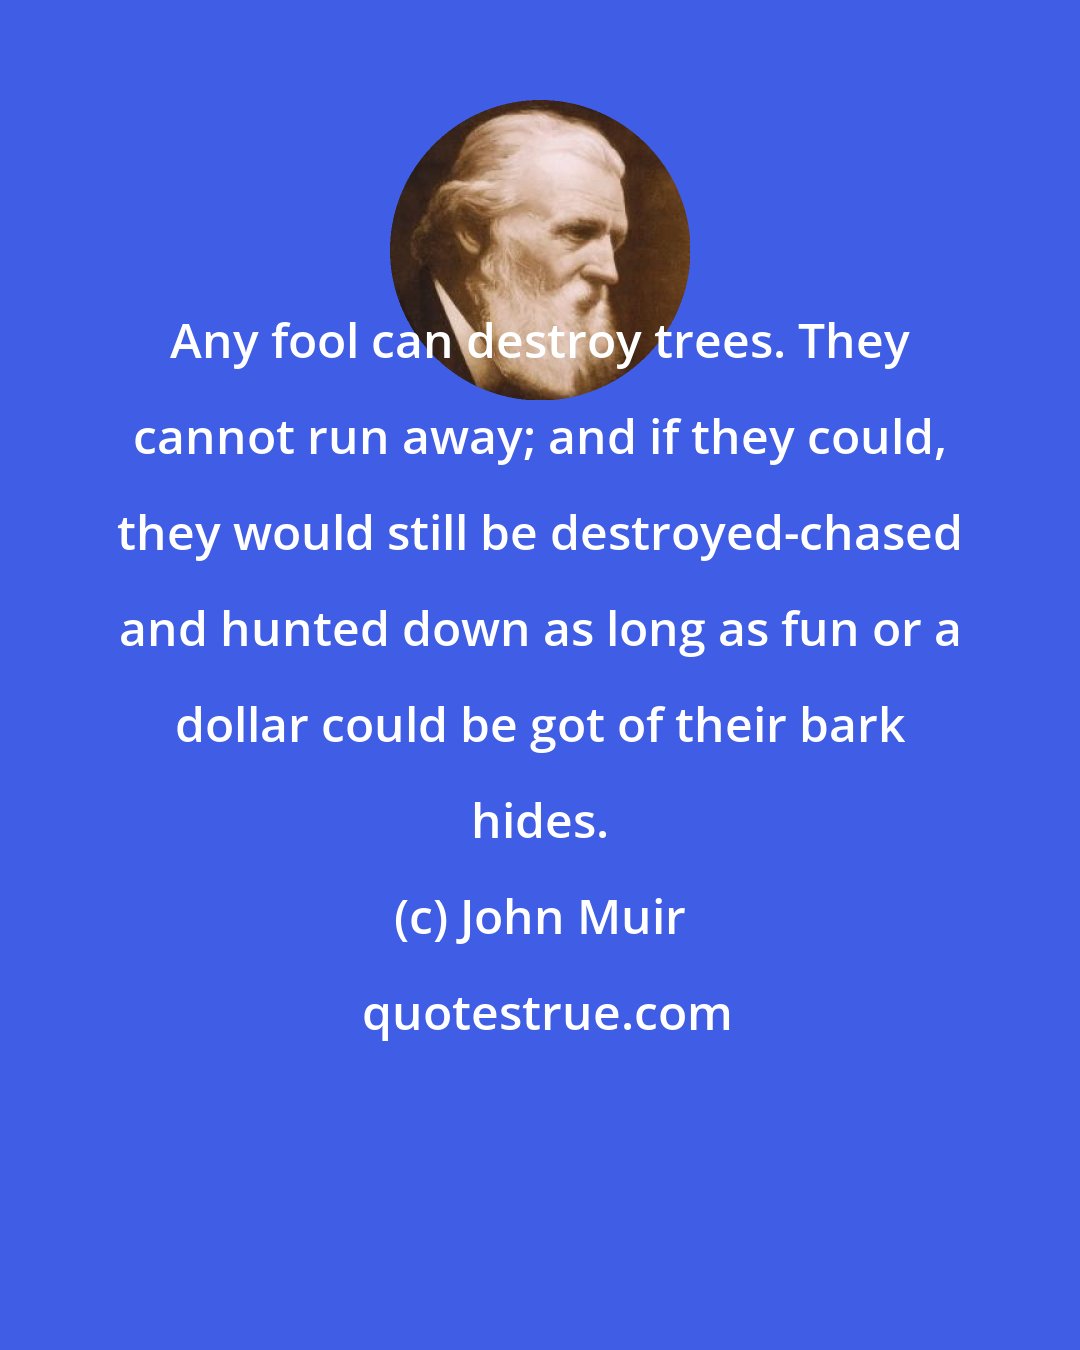 John Muir: Any fool can destroy trees. They cannot run away; and if they could, they would still be destroyed-chased and hunted down as long as fun or a dollar could be got of their bark hides.